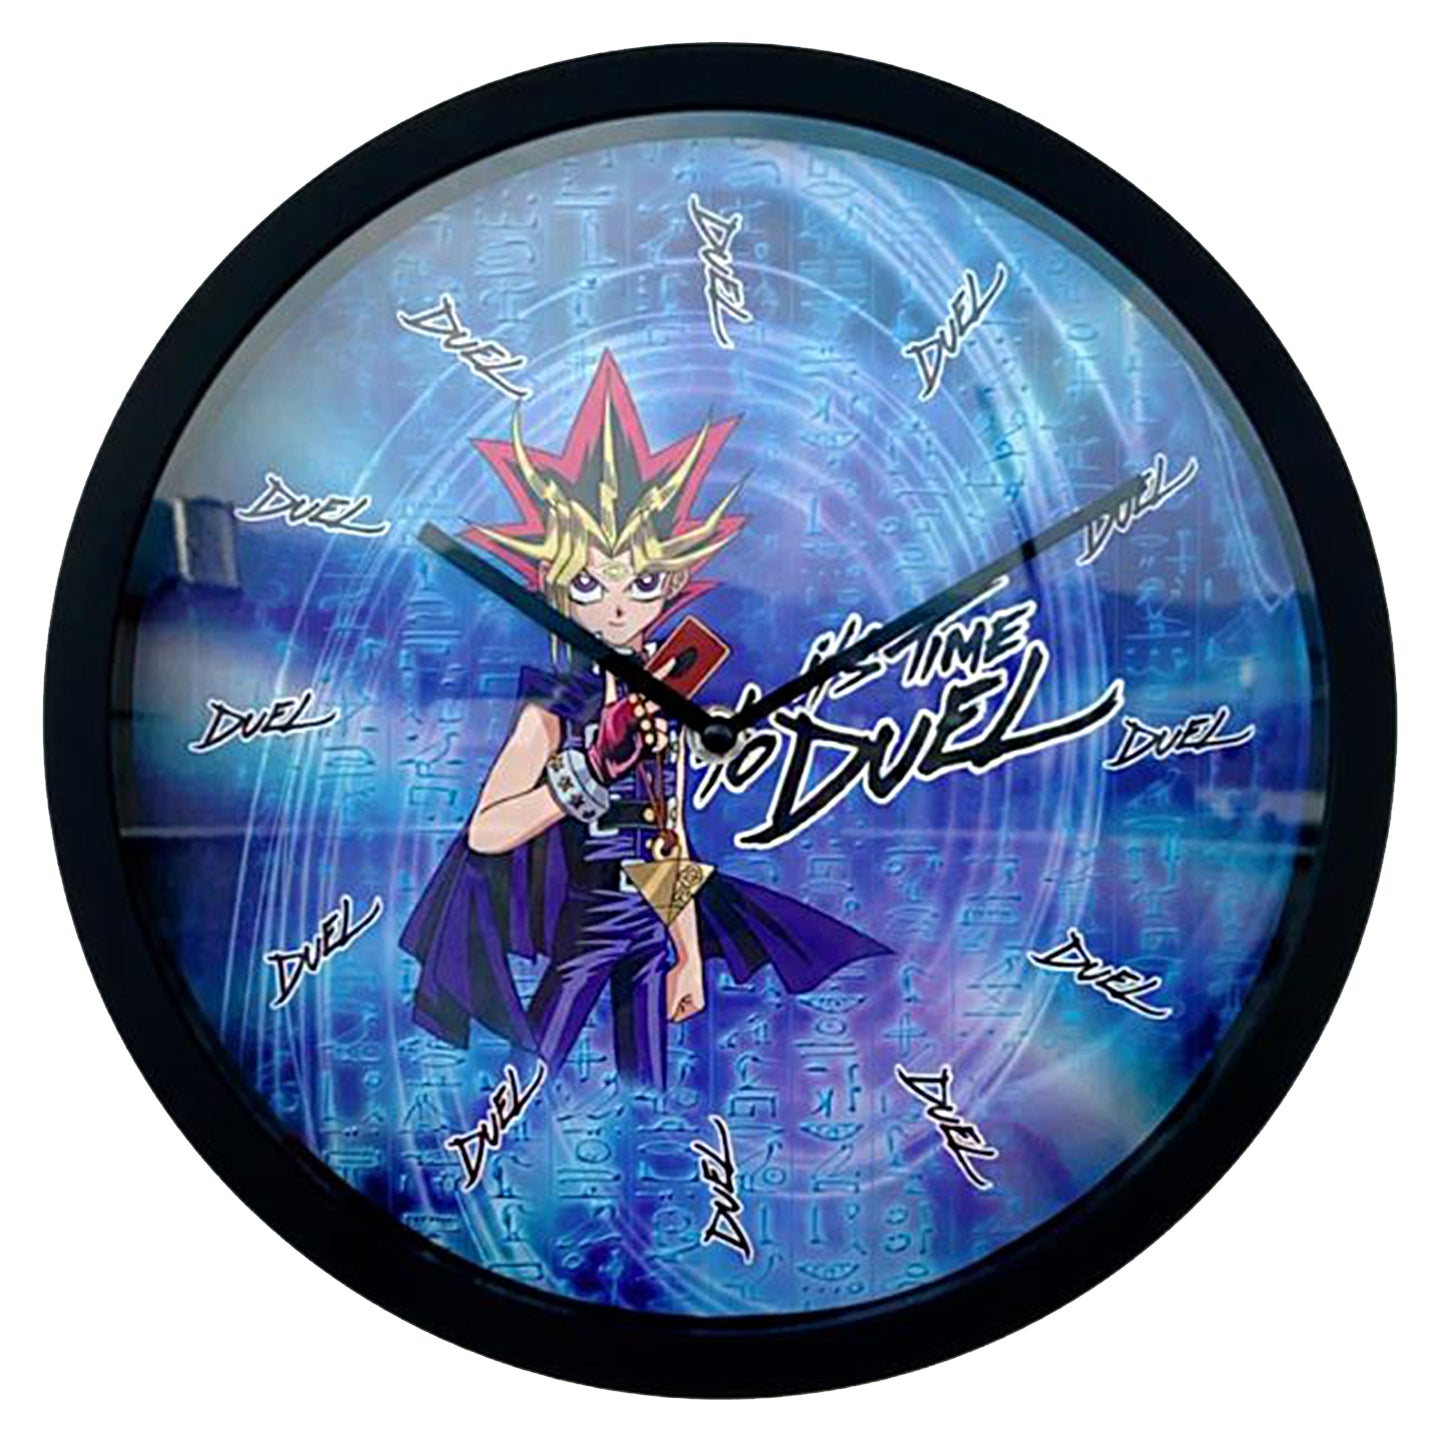 Yu-Gi-Oh! 'It's Time to Duel' Clock